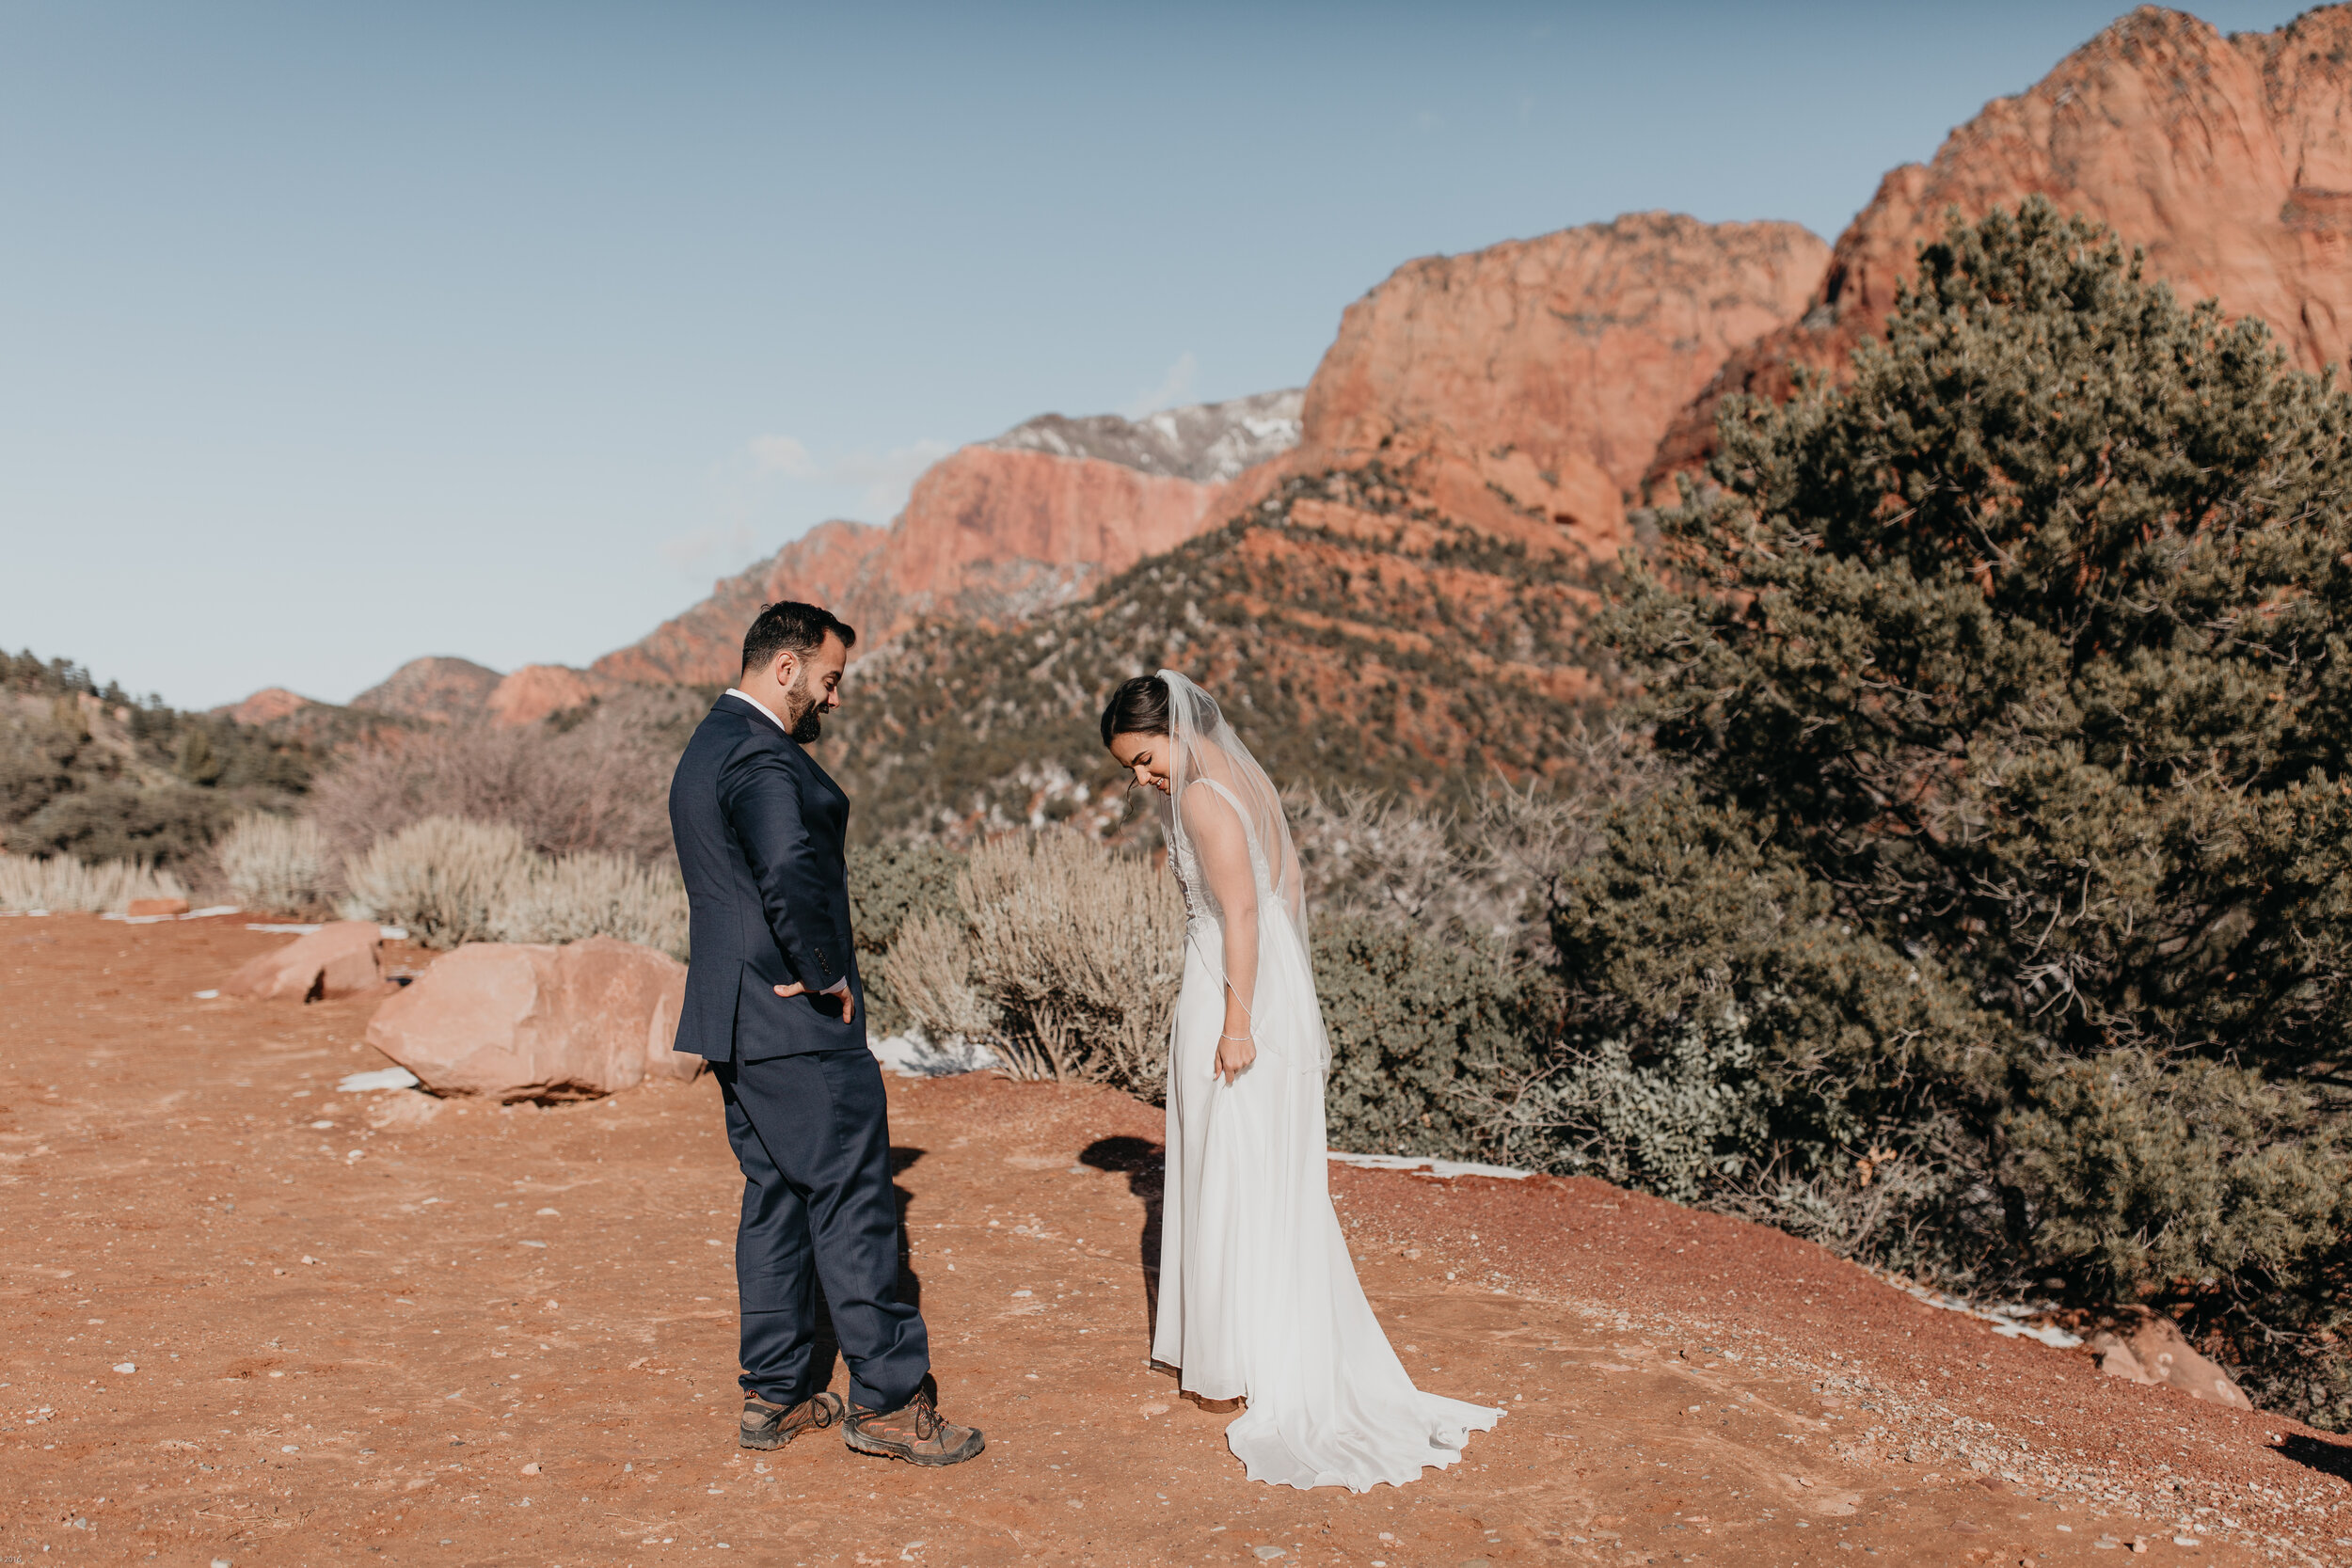 Nicole-Daacke-Photography-snowy-hiking-elopement-in-zion-national-park-zion-elopement-photographer-canyon-overlook-trial-brial-portraits-in-mt-zion-national-park-utah-desert-adventure-elopement-photographer-105.jpg